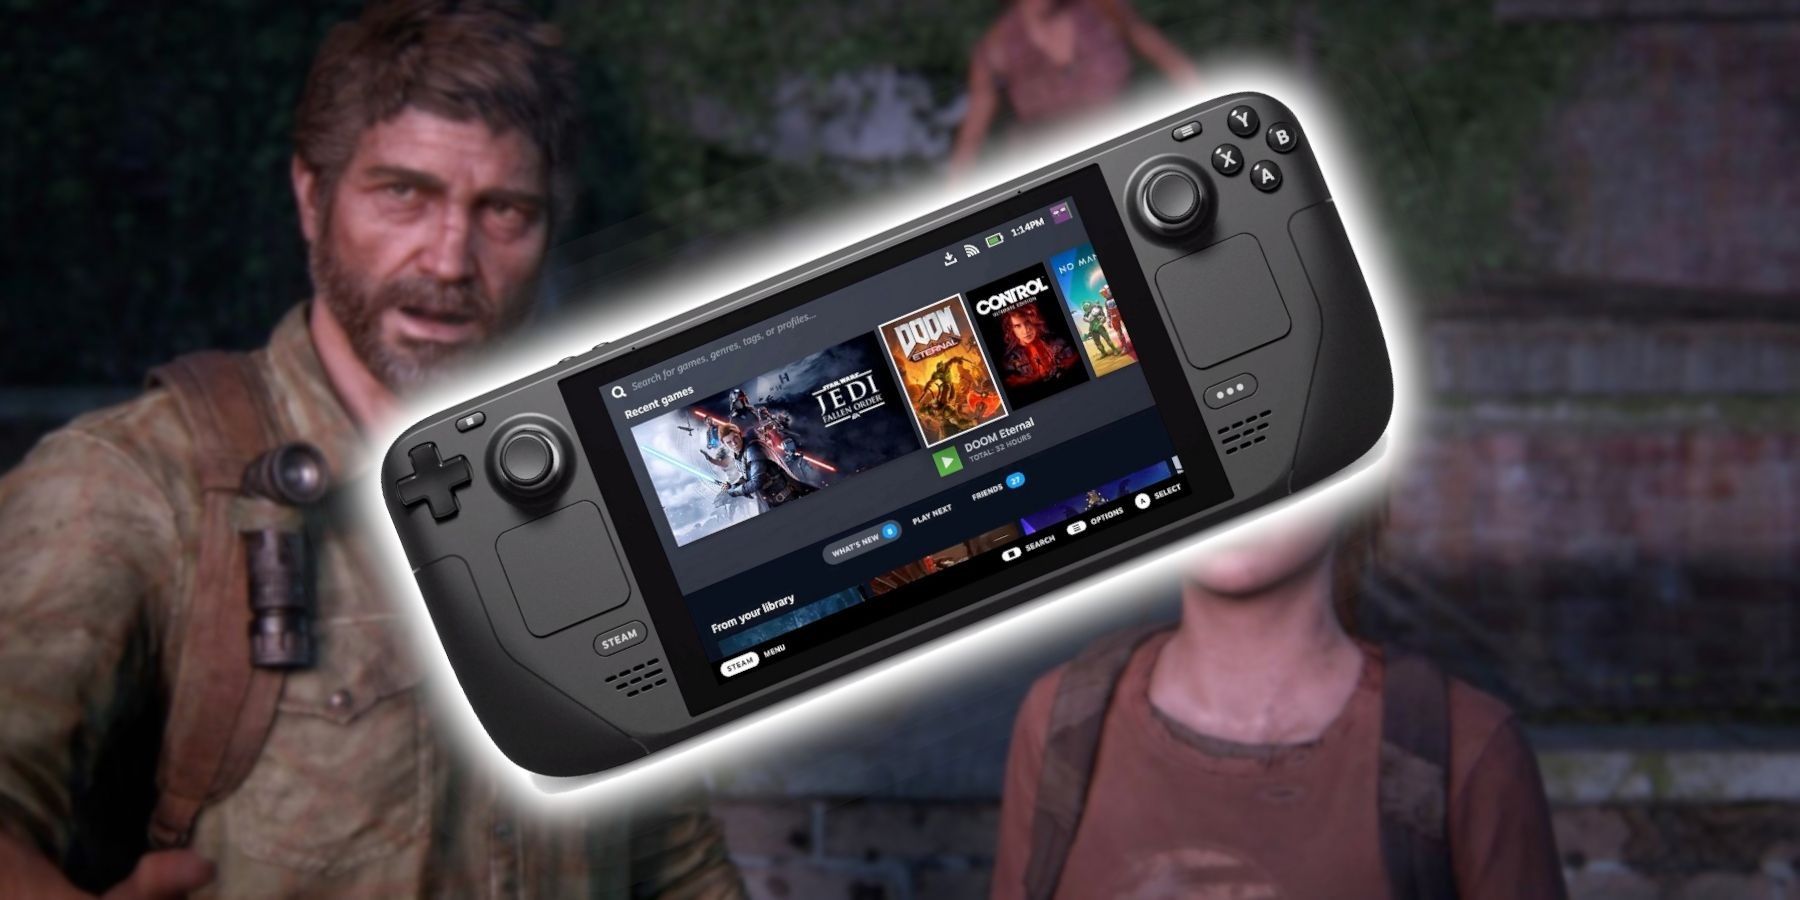 Valve declares The Last of Us Part 1 'Unsupported' on Steam Deck